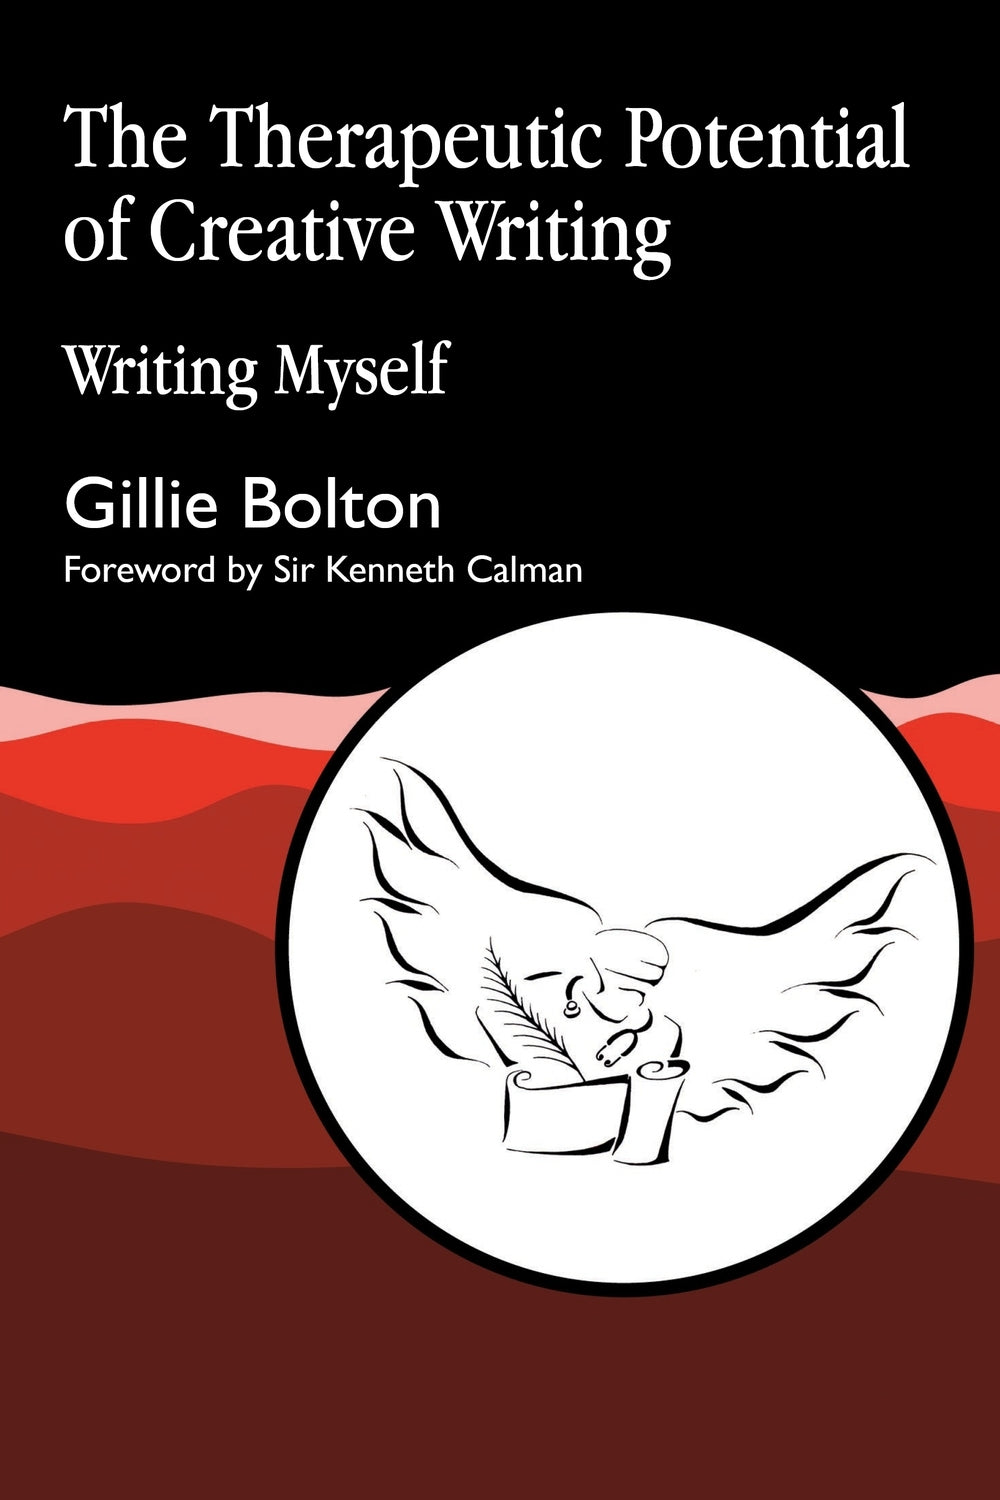 The Therapeutic Potential of Creative Writing by Gillie Bolton